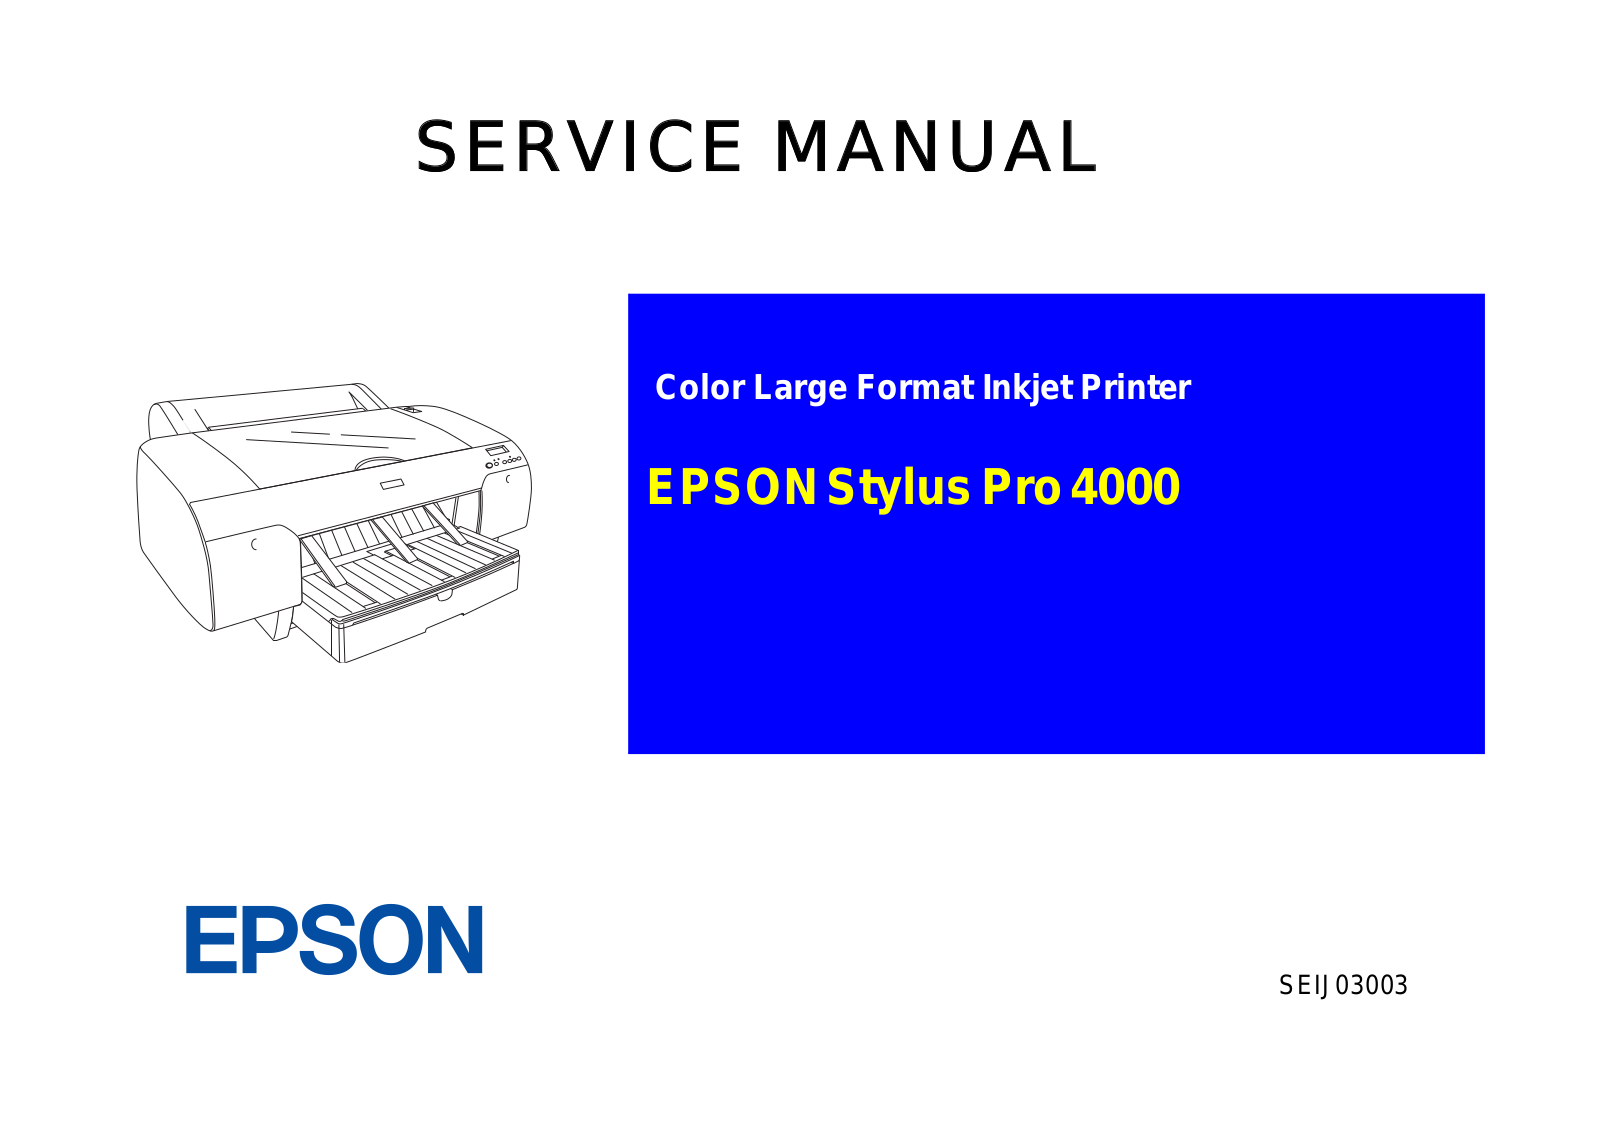 Epson Stylus Pro 4000 Service Manual and Field Repair Guide